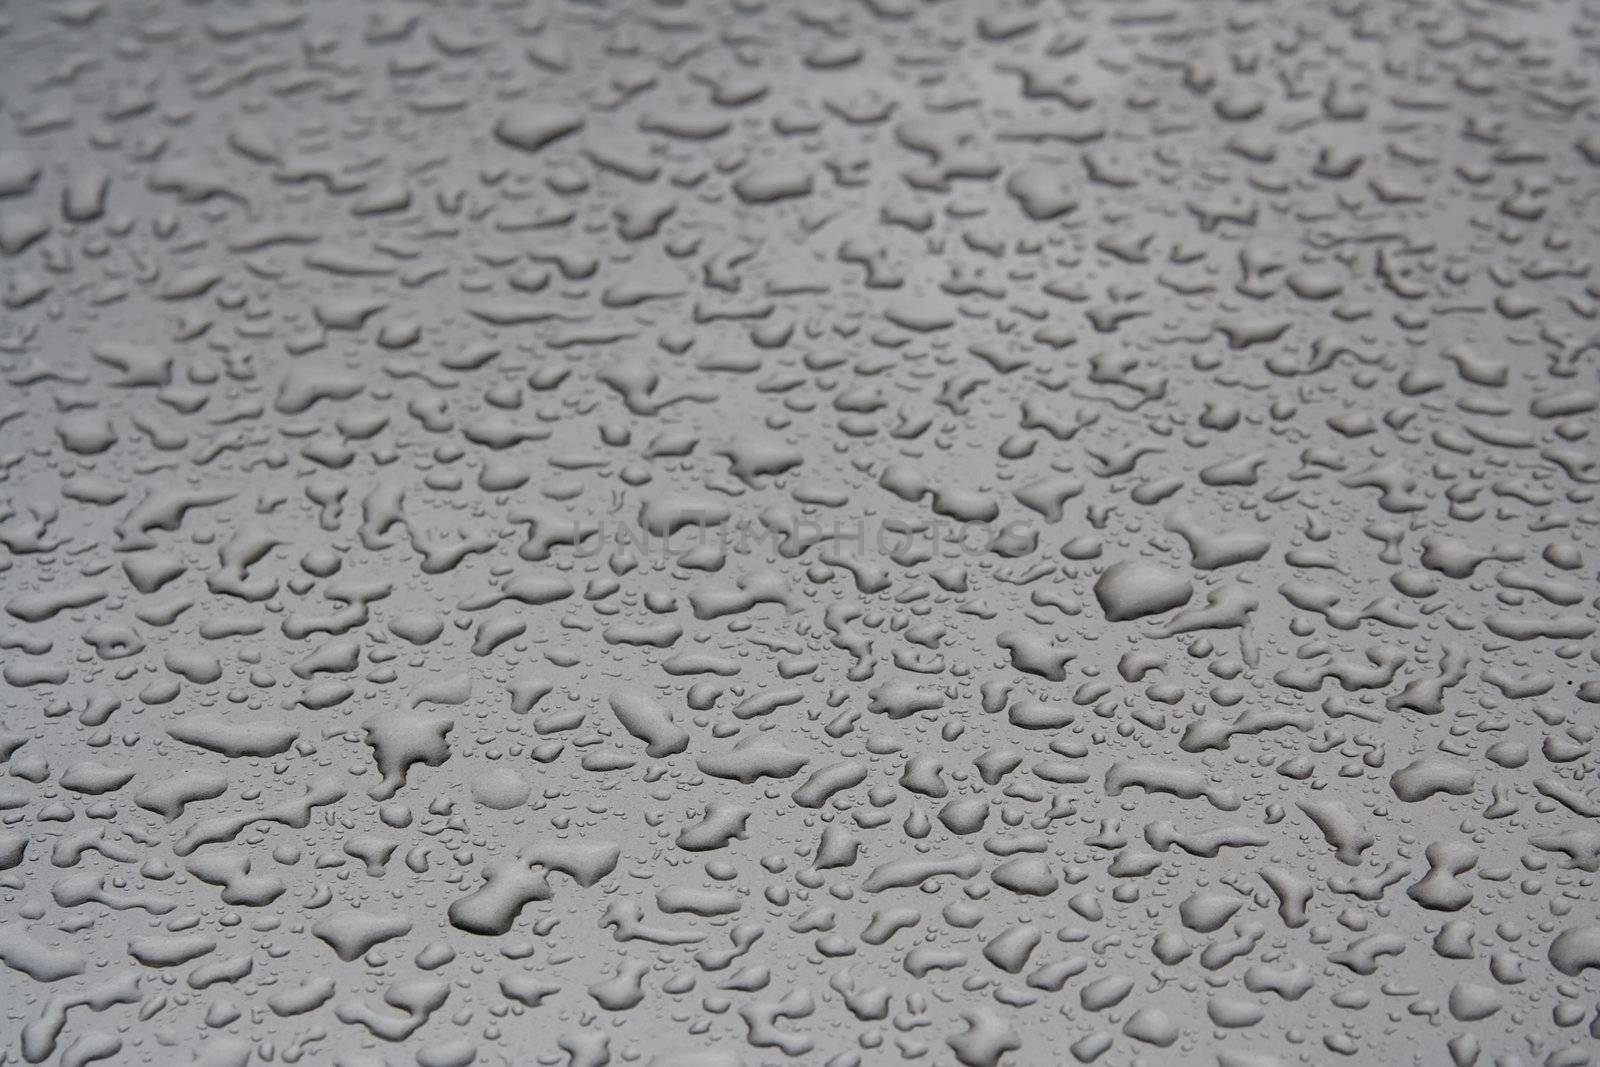 Water Droplets on a Steel Surface by Sergius